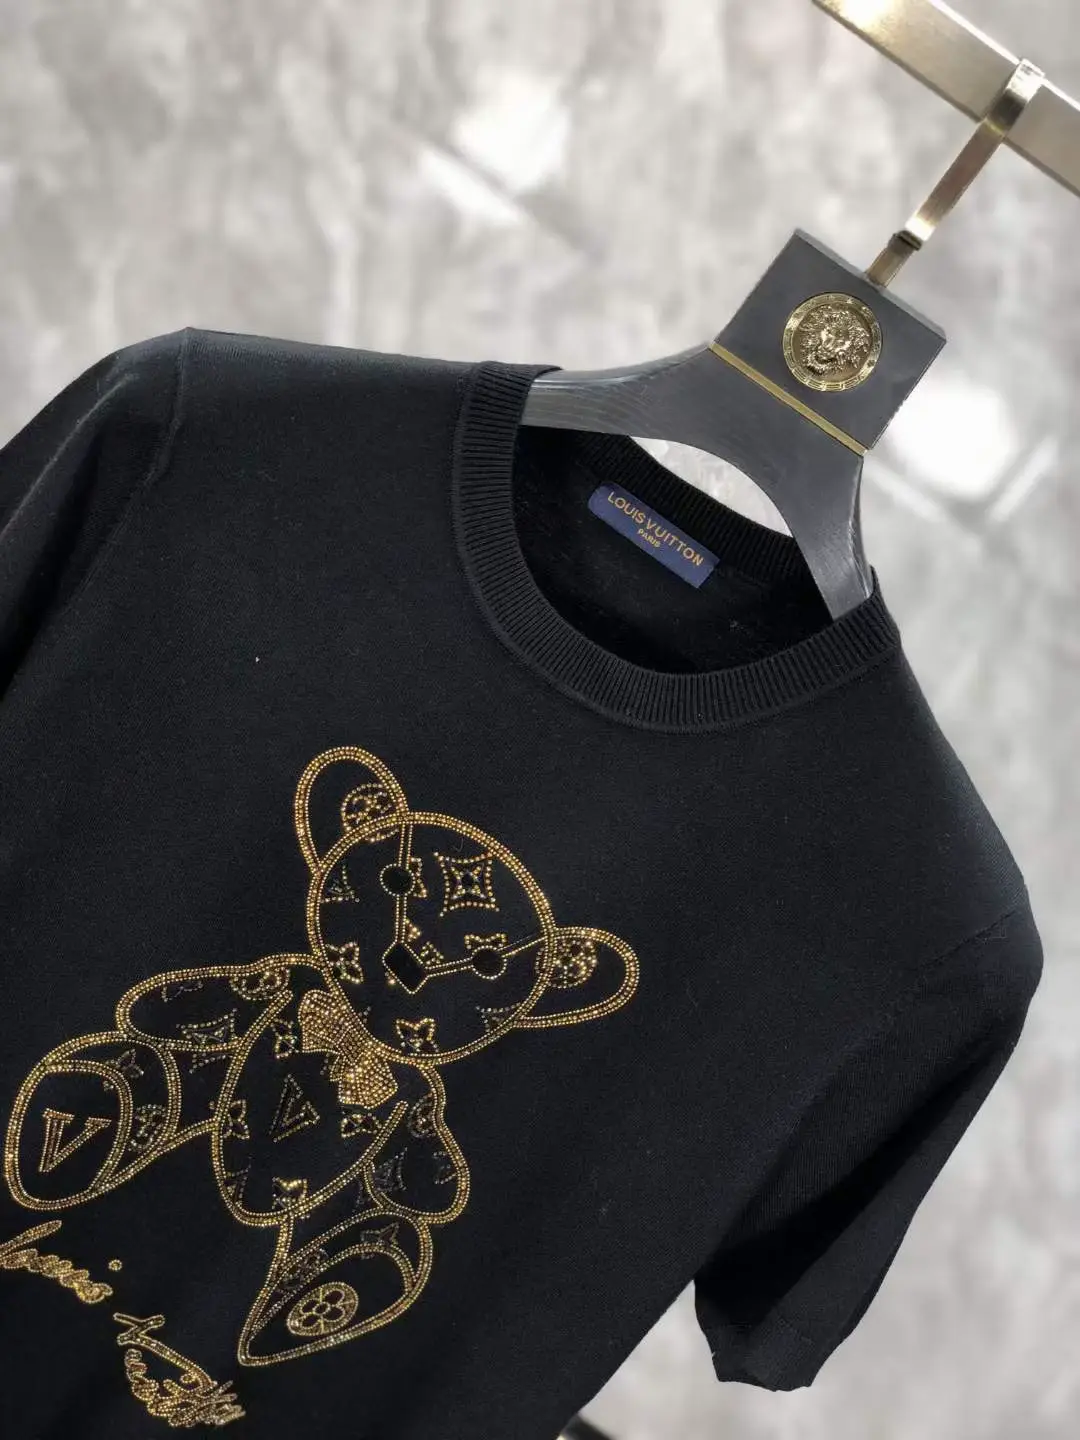 LOUIS VUITTON BLACK FLOWER LOGO, Gallery posted by Dico_Italy